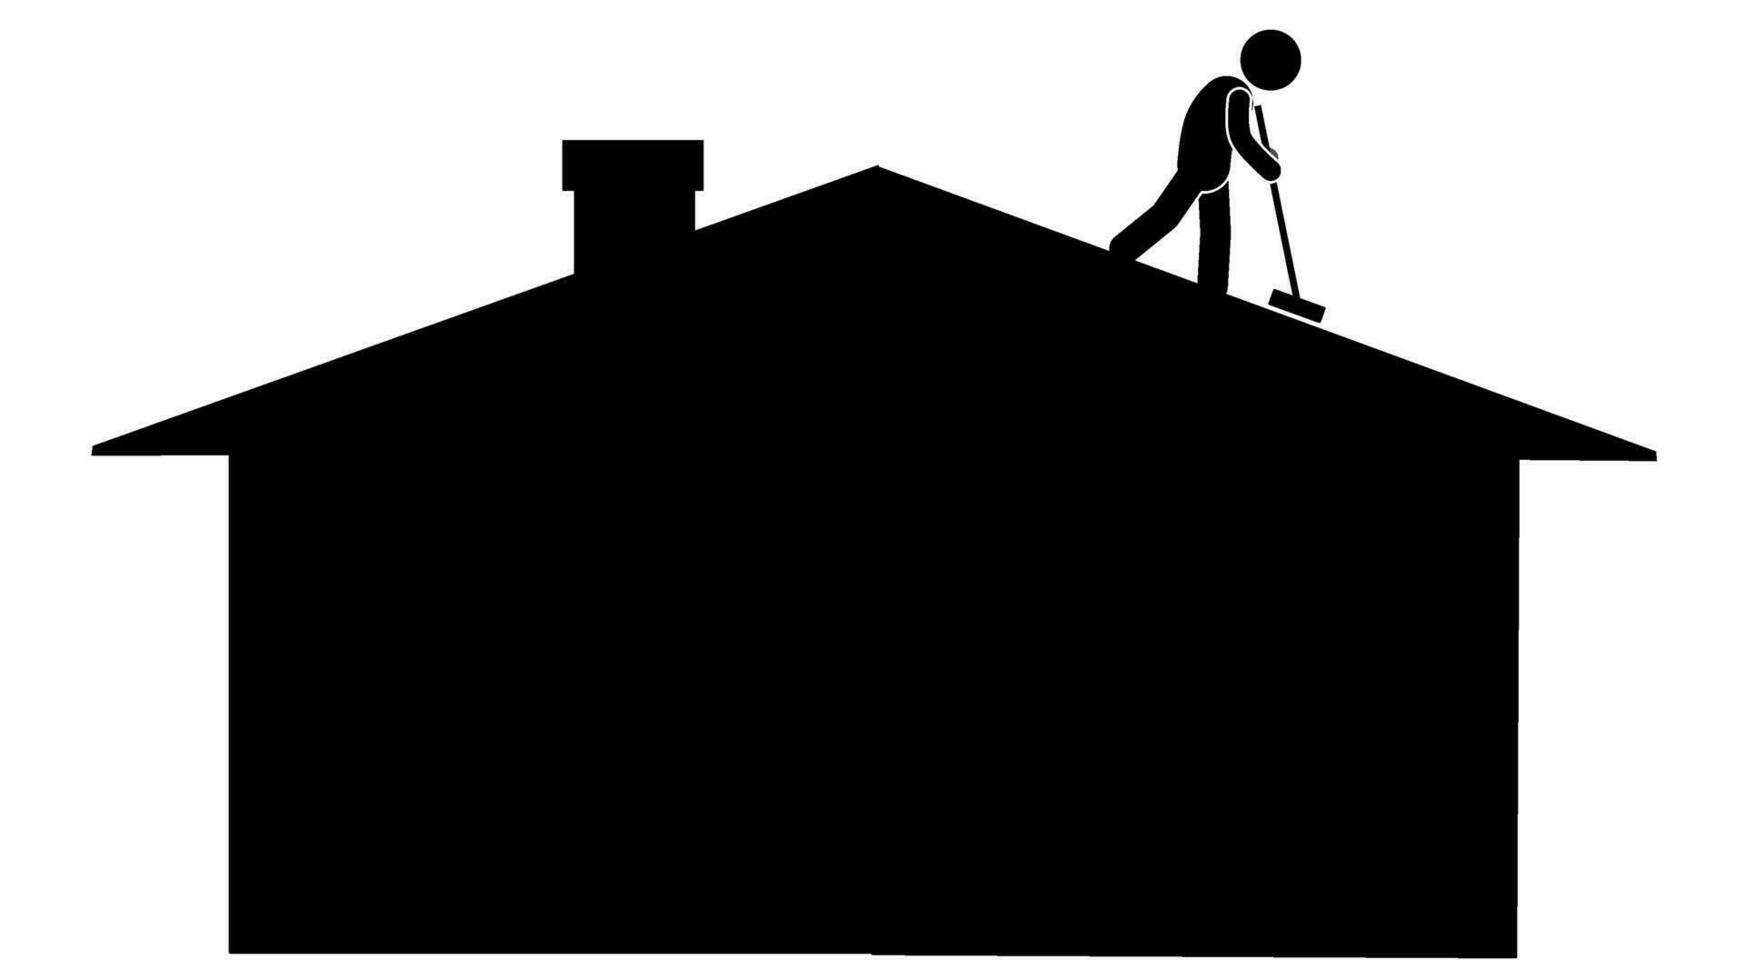 illustration and icon stick figure,stickman,pictogram. cleaning the house, washing the house,cleaning the roof vector